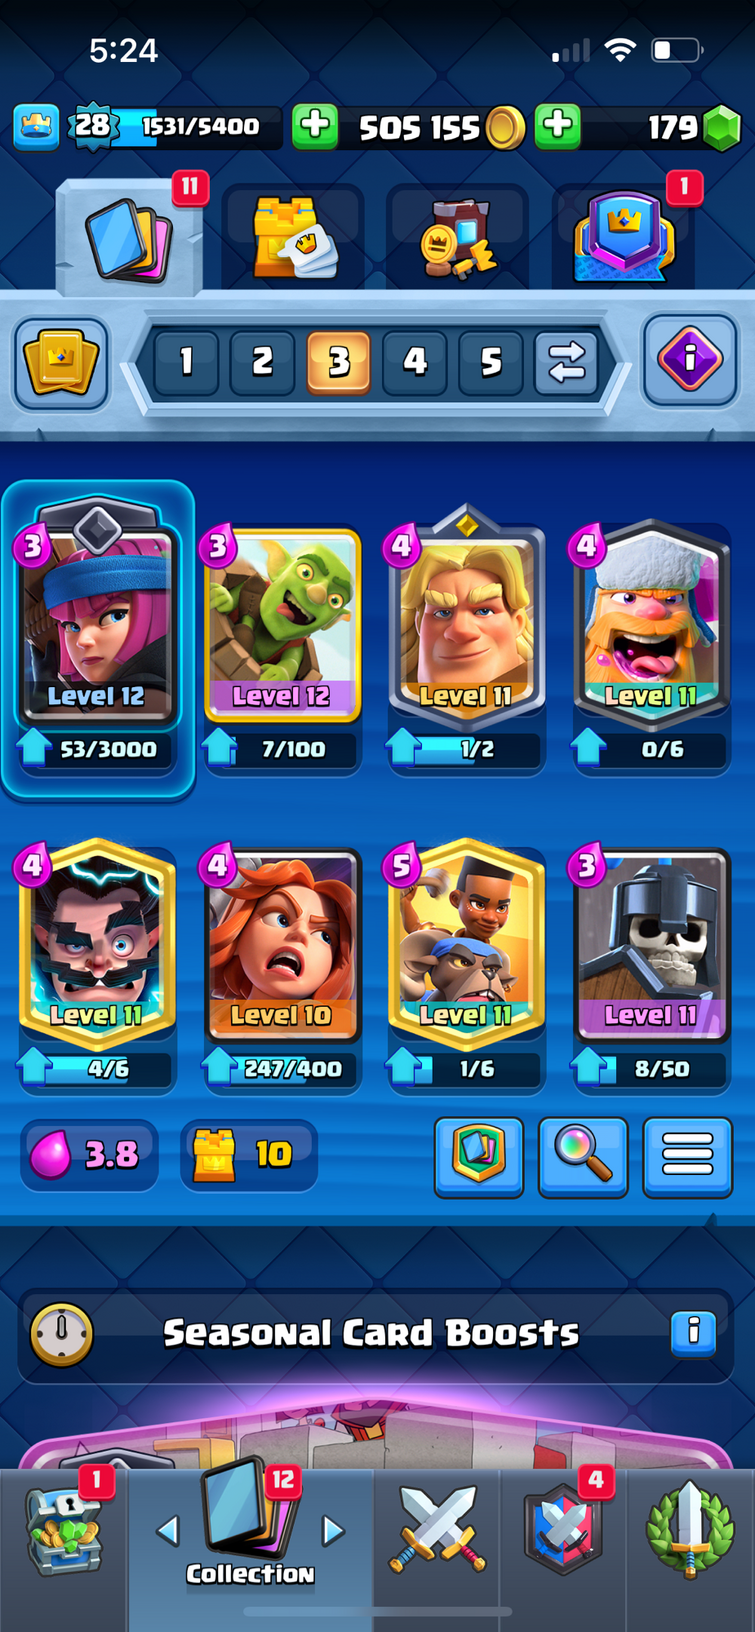 I'm in arena 6 and have recently unlocked the miner and princess